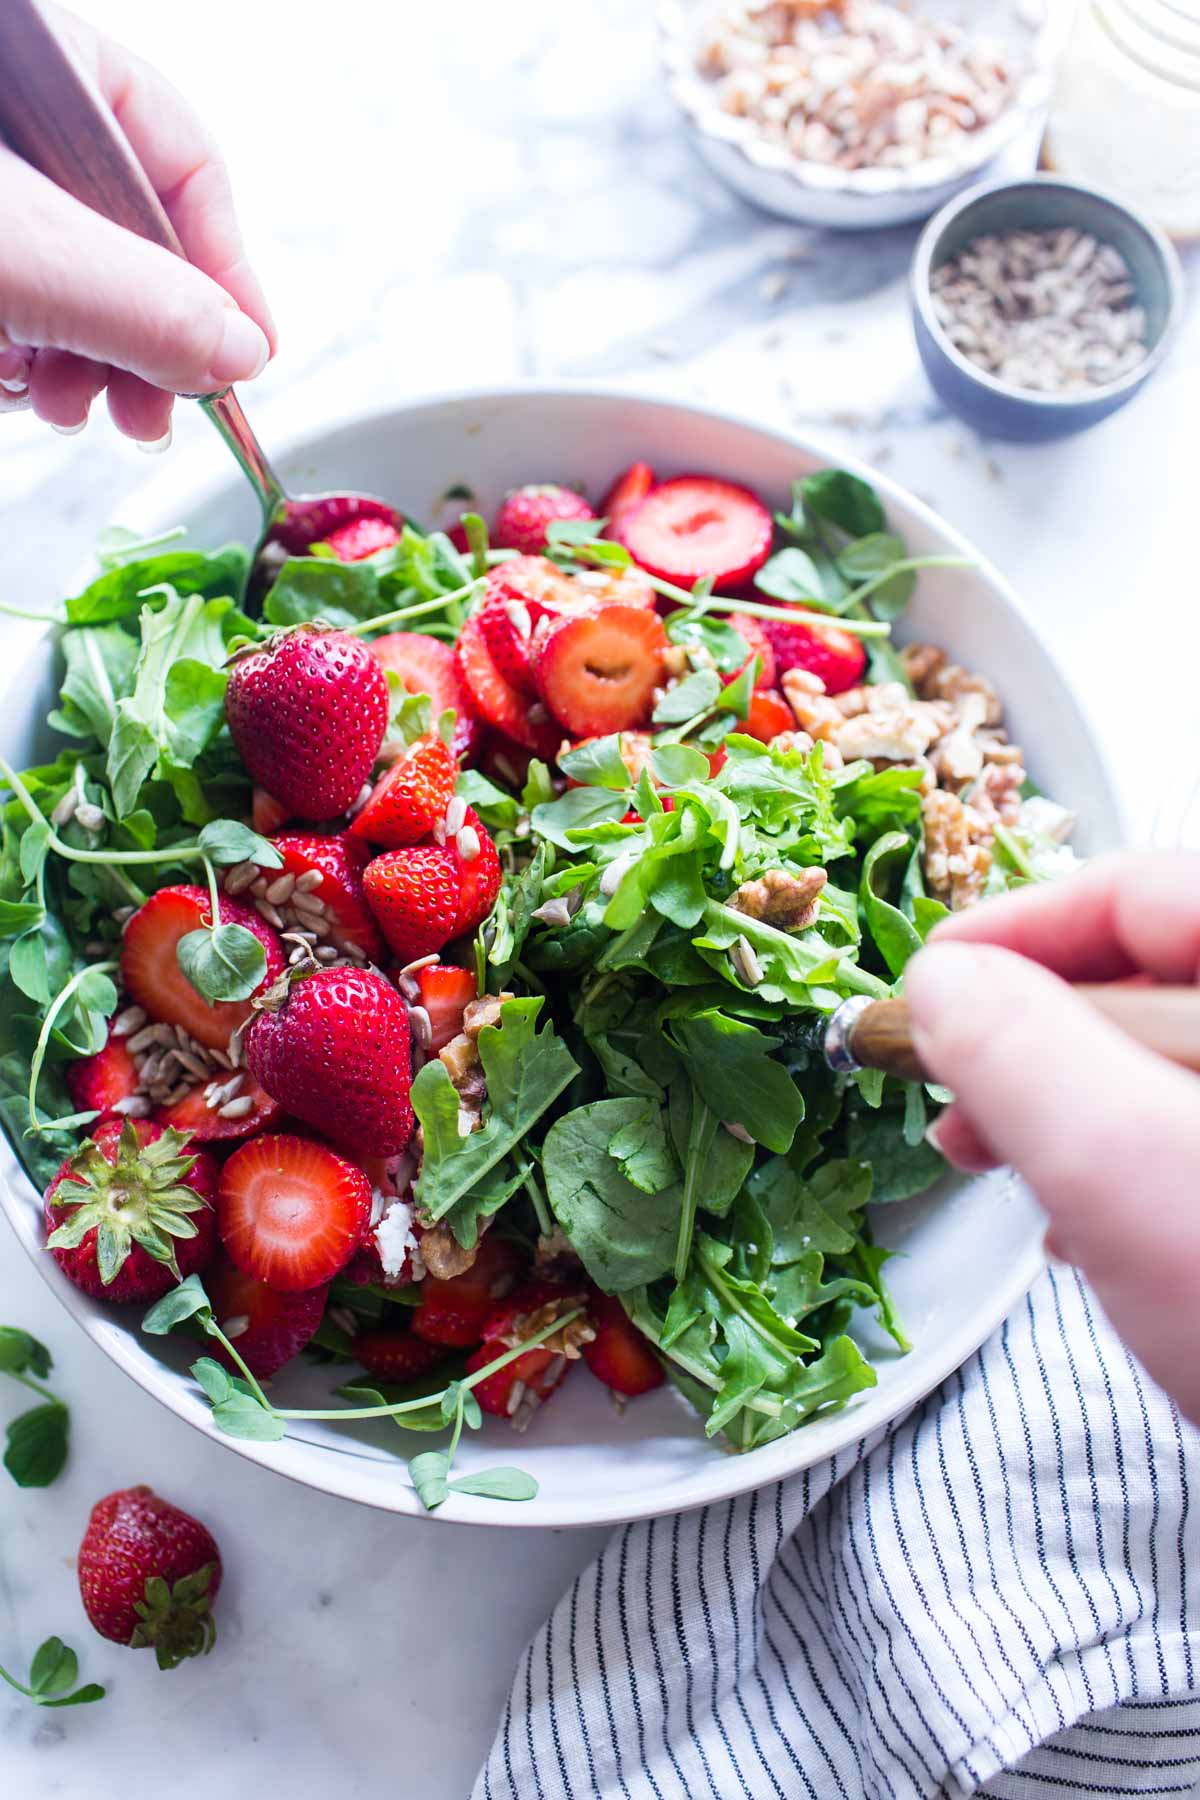 Tossing a salad with arugula strawberries and goat cheese.